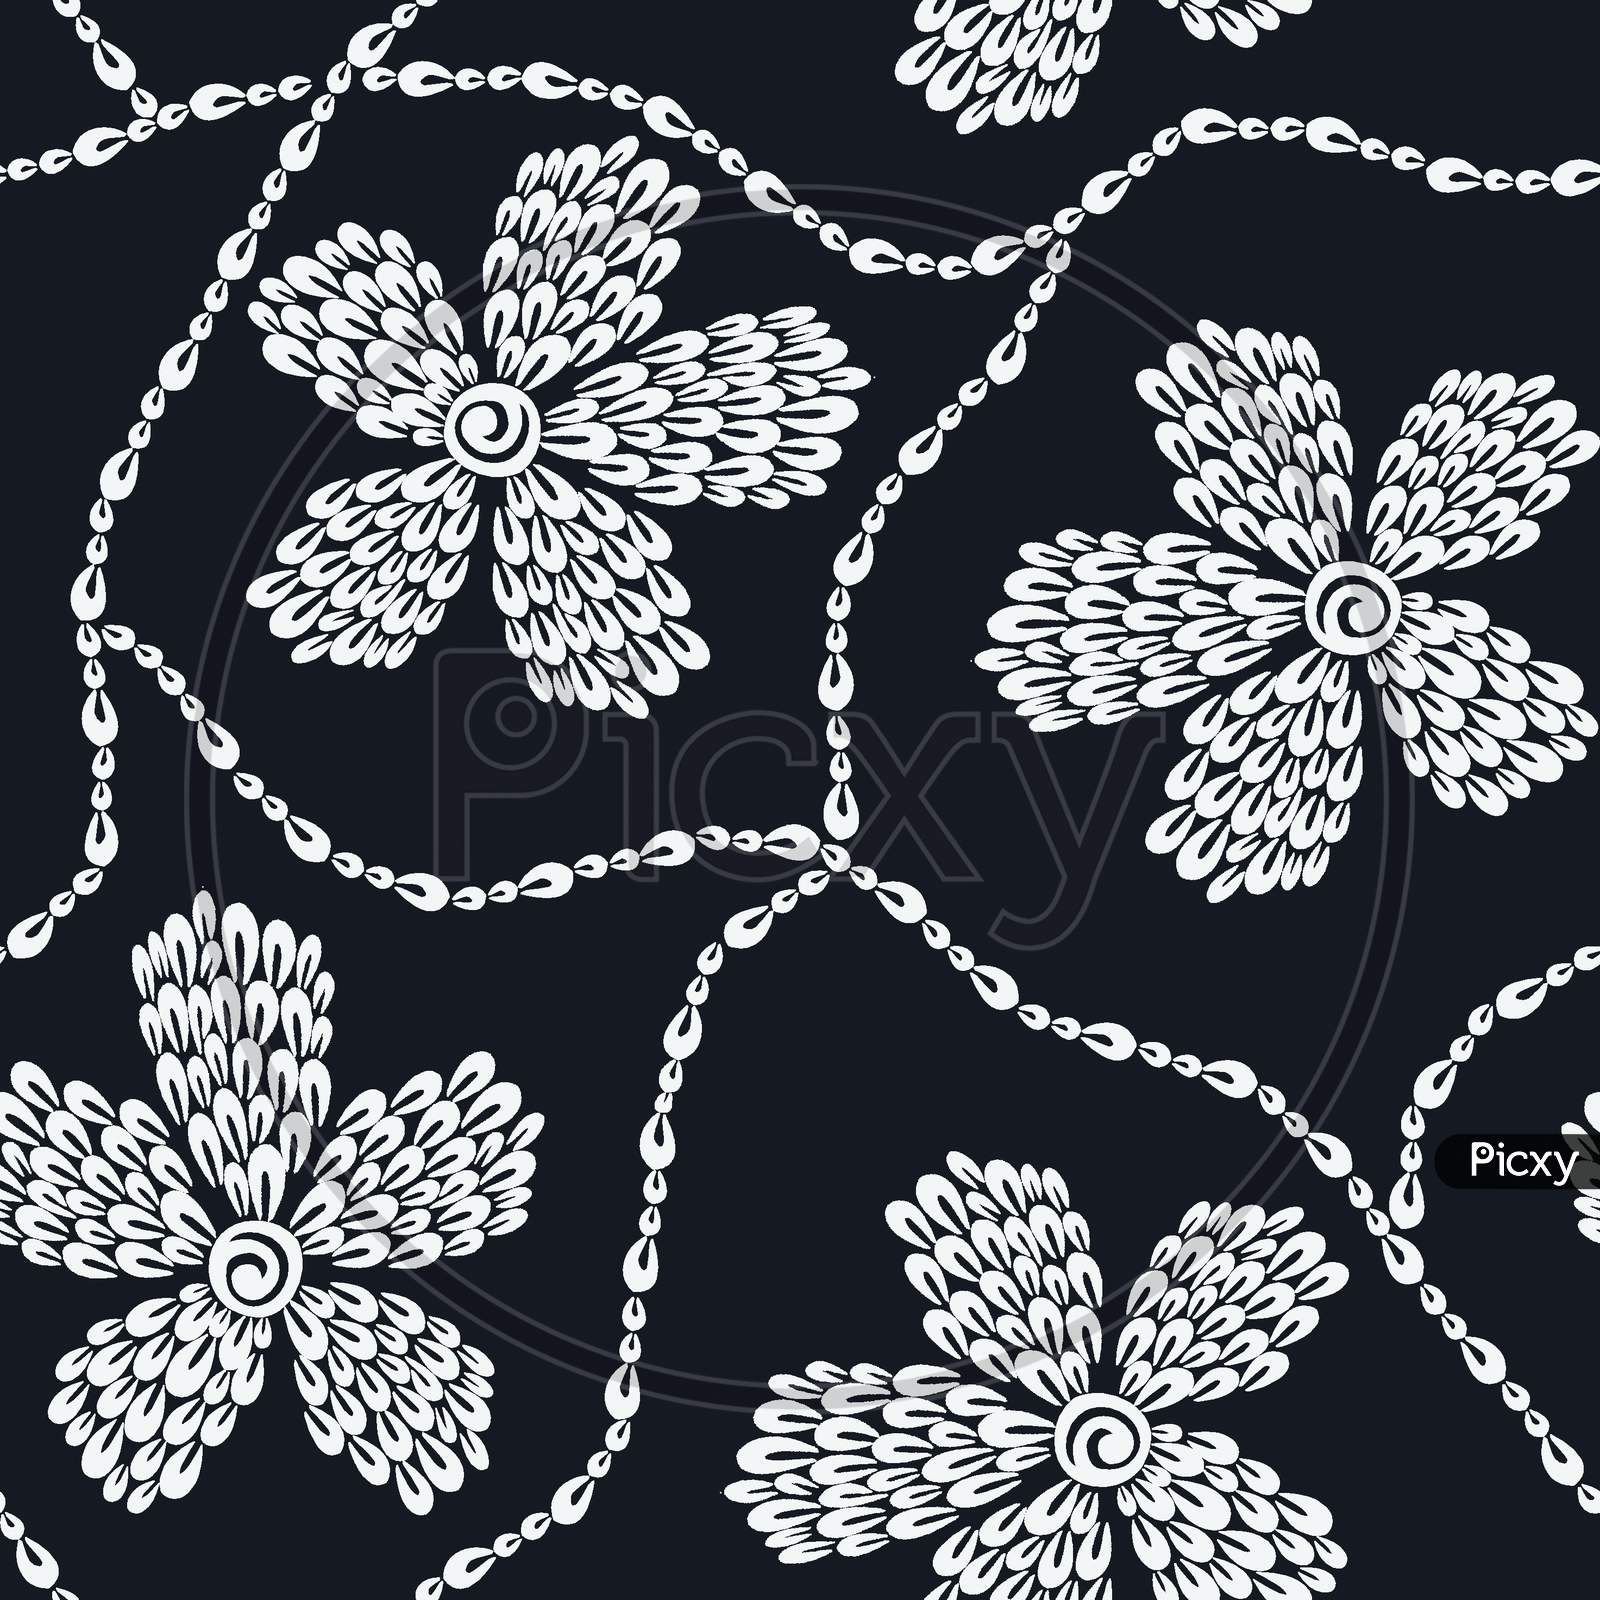 Seamless Black And White Floral Design